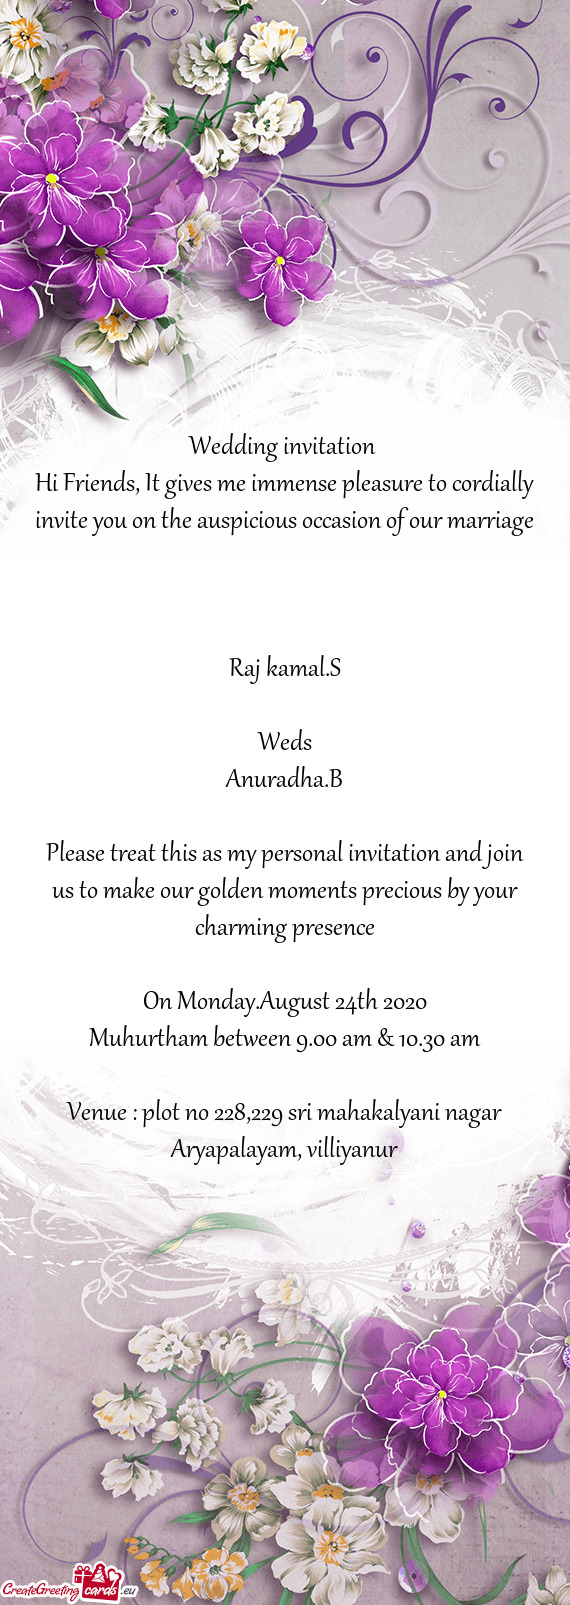 Hi Friends, It gives me immense pleasure to cordially invite you on the auspicious occasion of our m